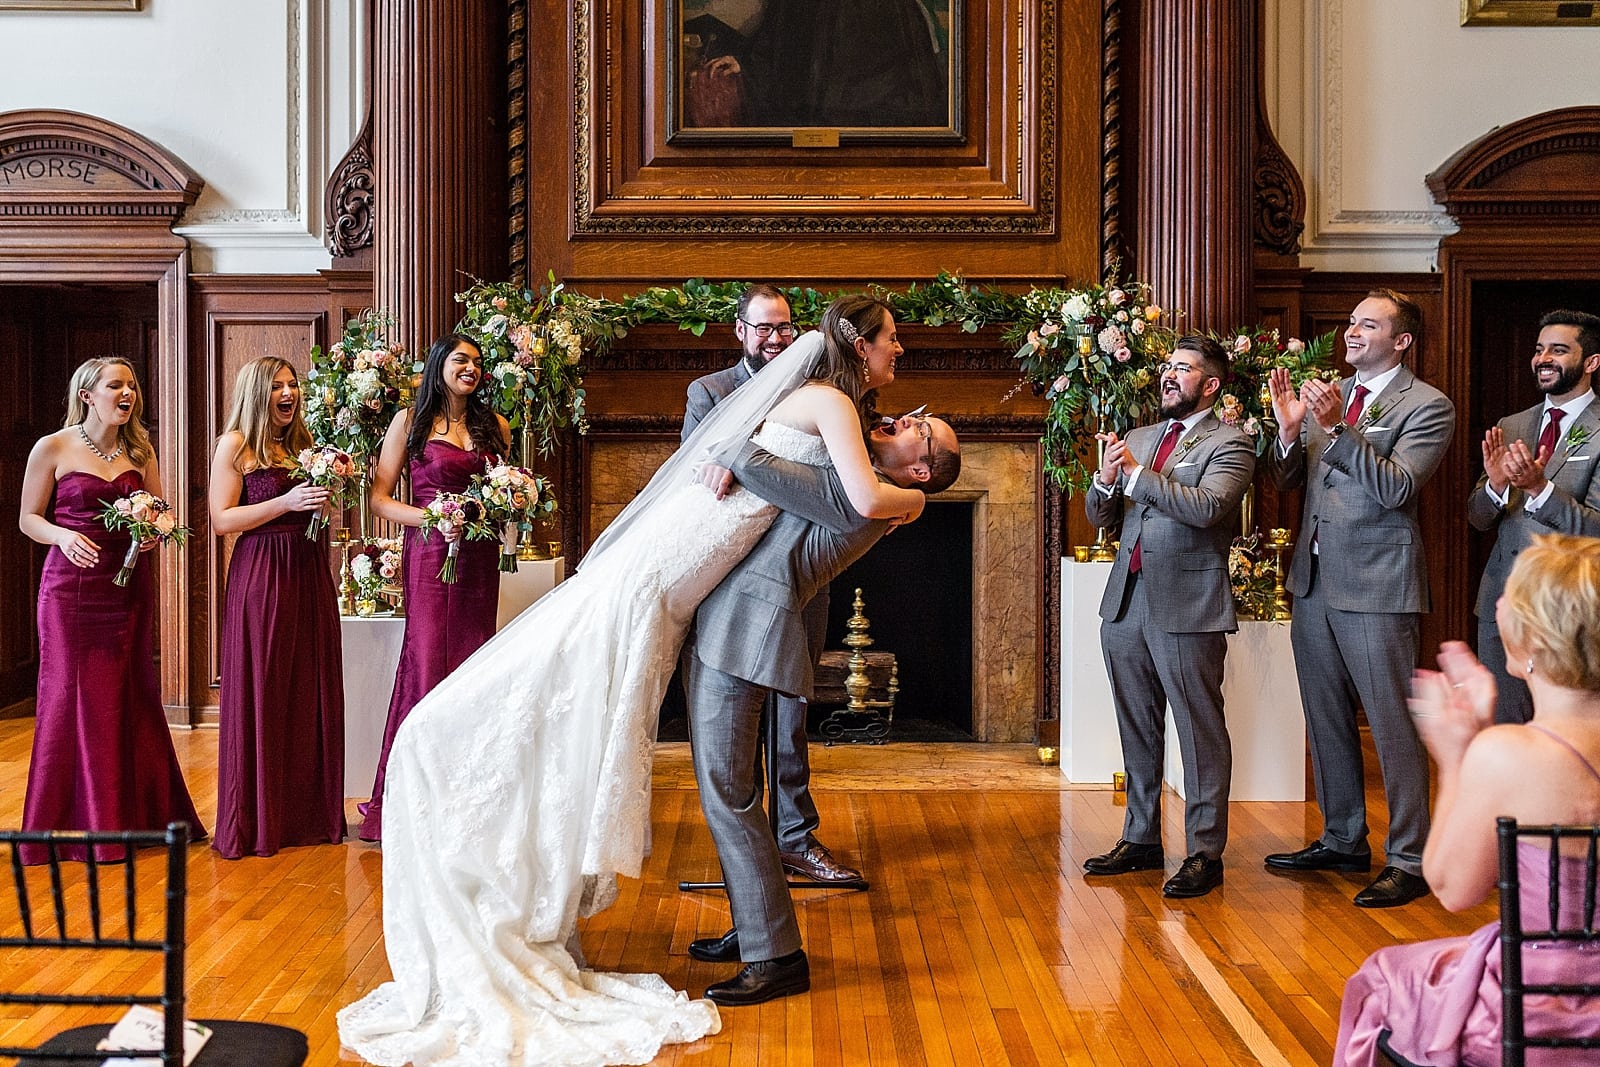 Groom lifting bride during wedding ceremony and celebrating, College of Physicians wedding 